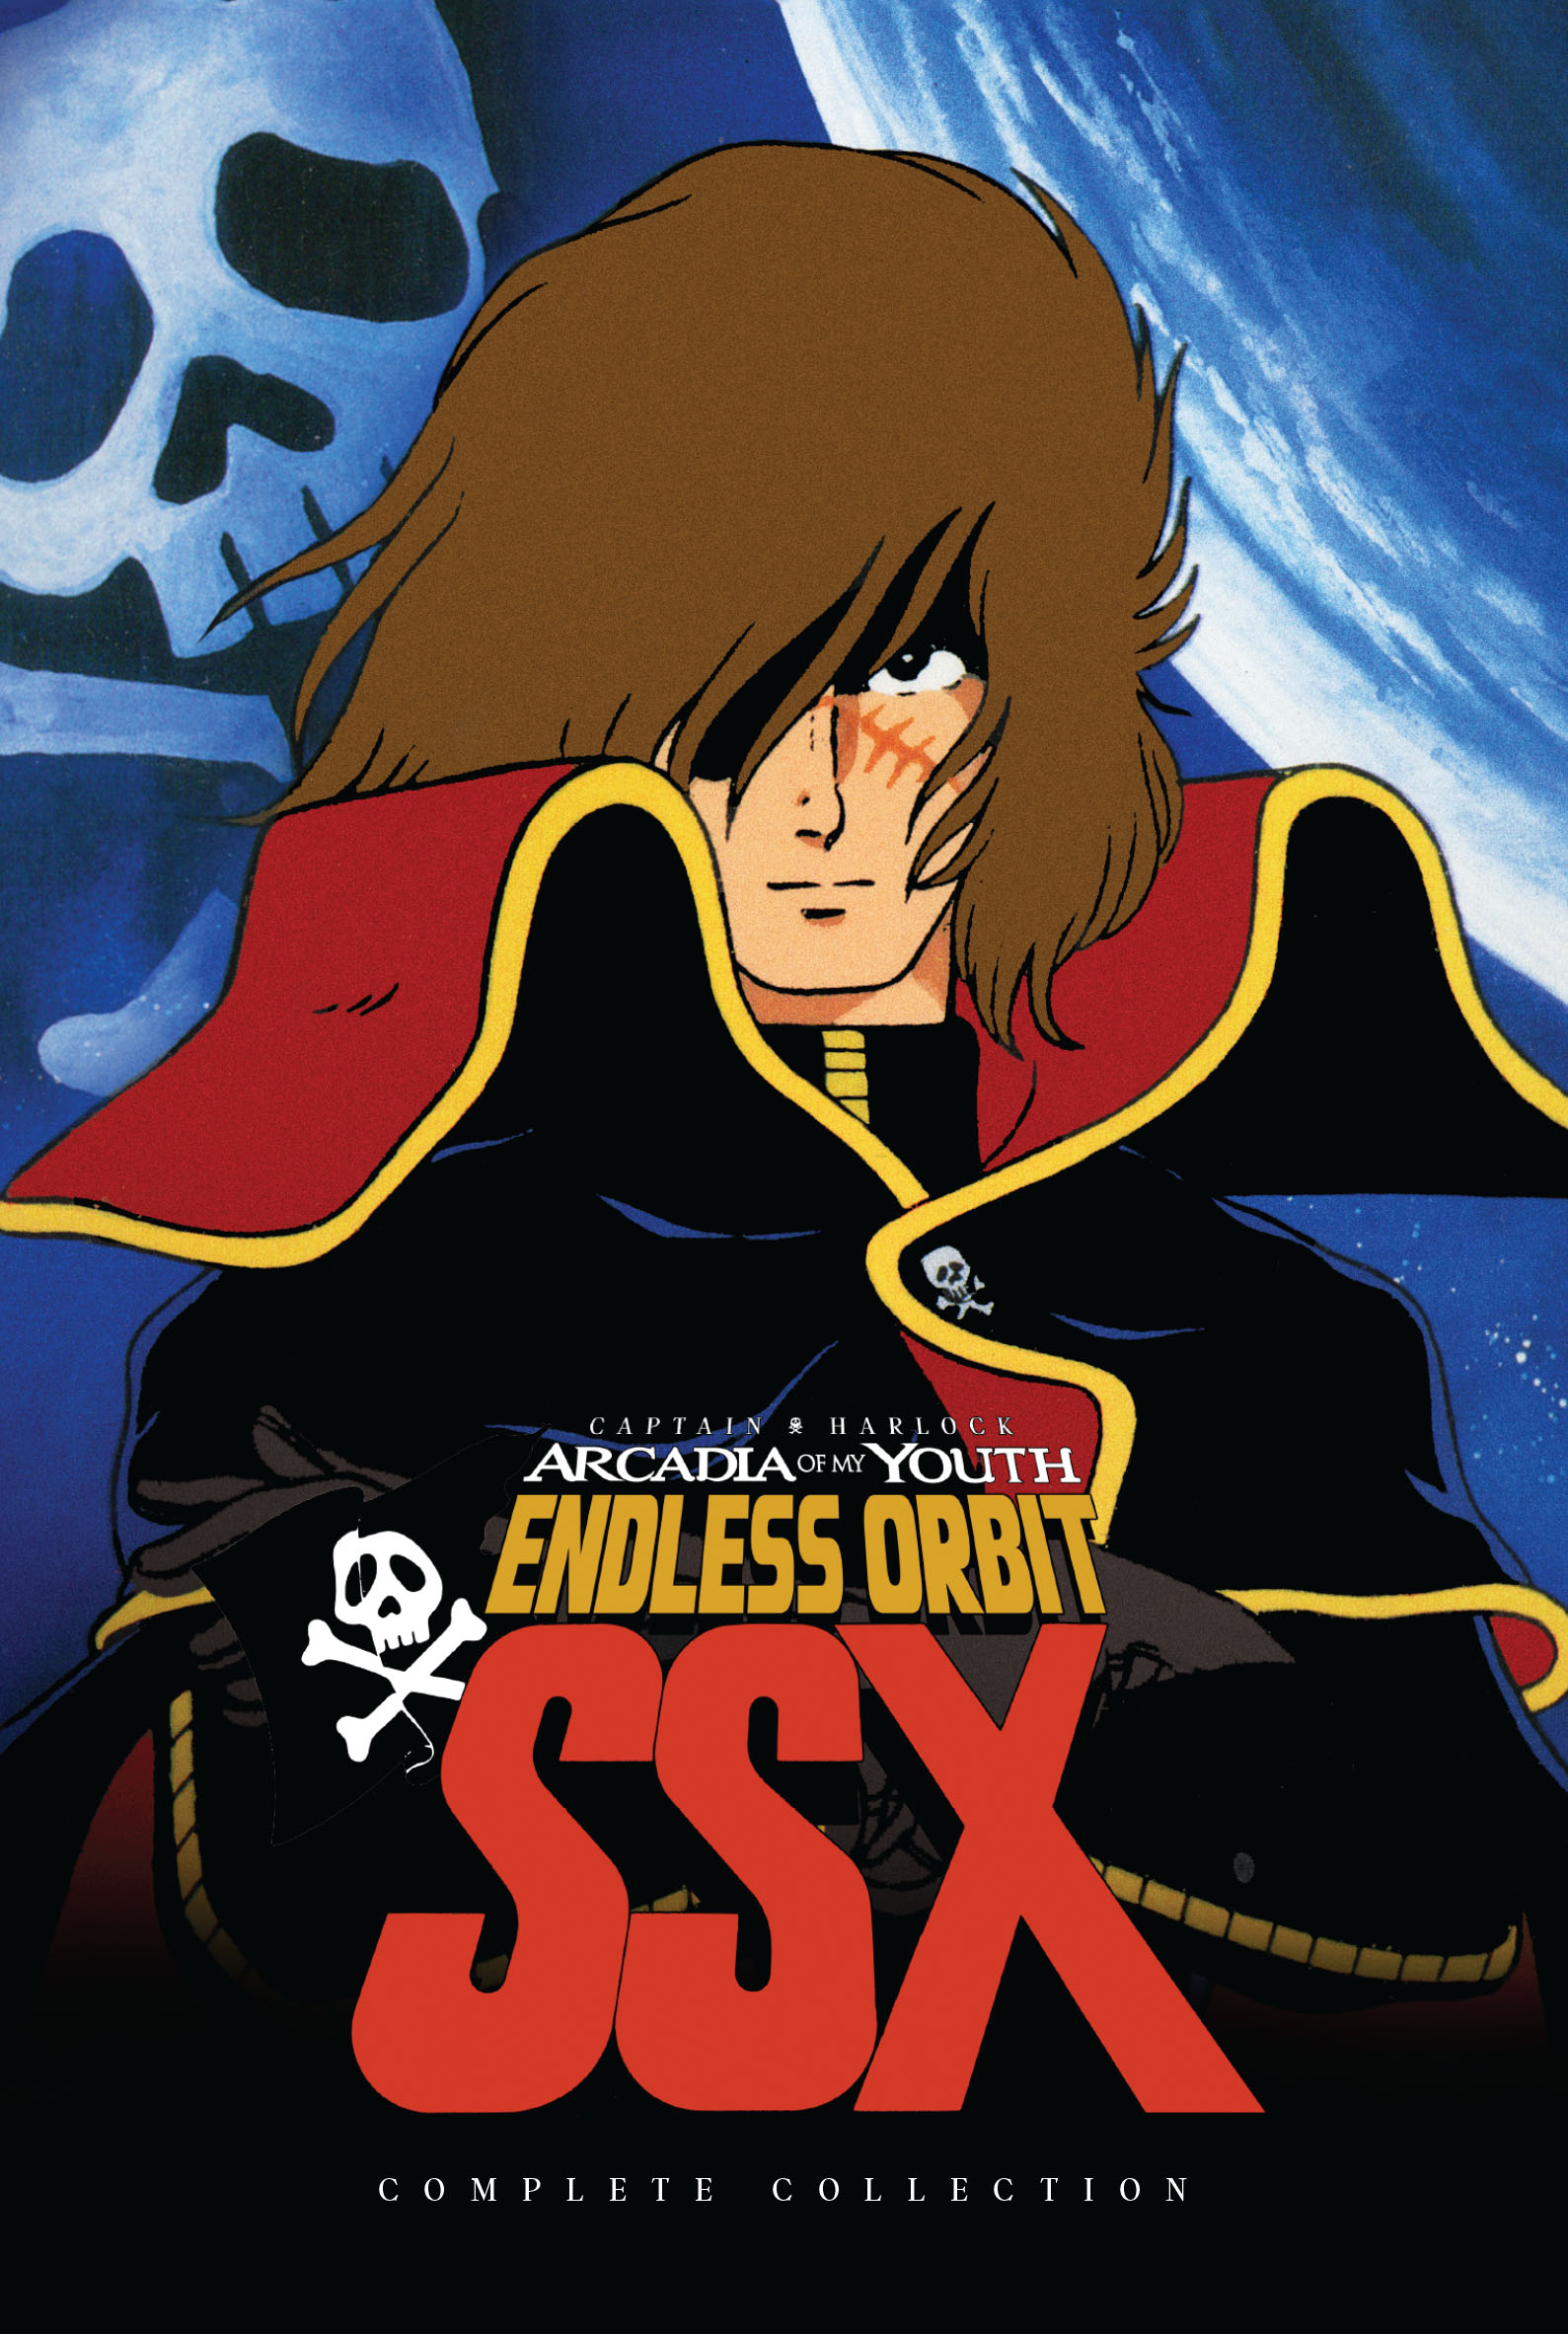 Captain Harlock Arcadia of My Youth Endless Orbit SSX DVD image count 0